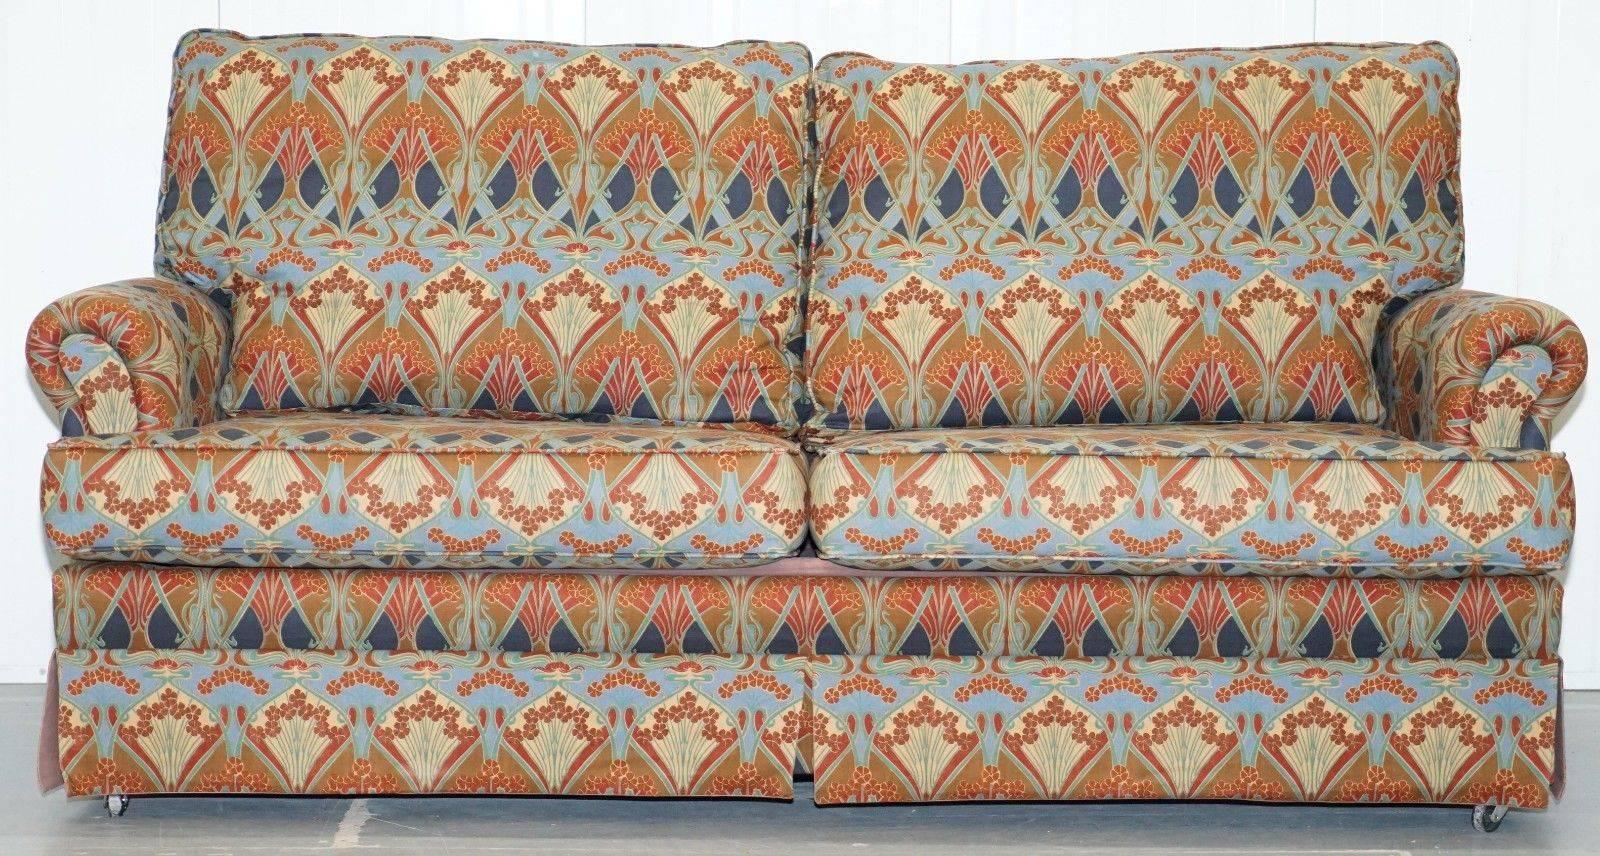 We are delighted to offer for sale this stunning Liberty London Ianthe upholstery Felmming & Howland sofabed 

A truly magnificent piece, the upholstery is just about a classic English country house as you will find anywhere, it screams style